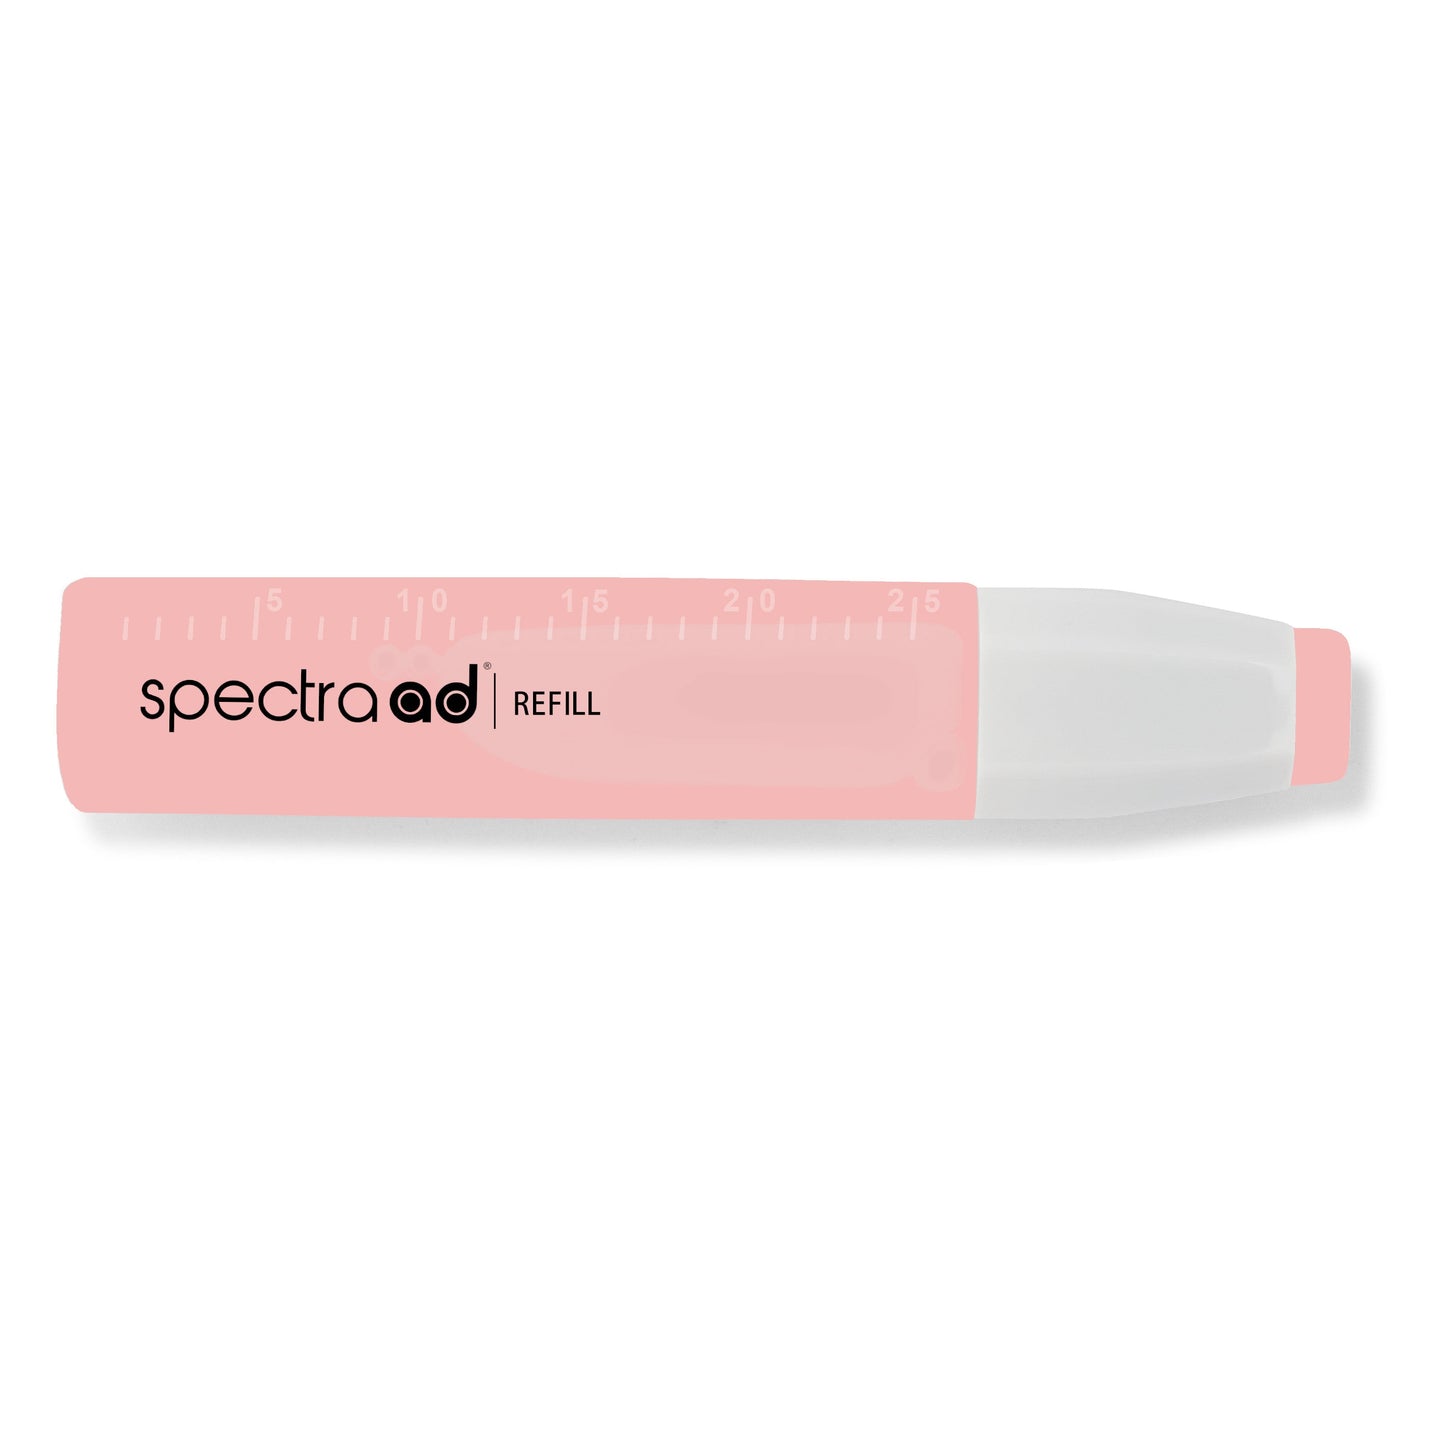 123 - Soft Coral - Spectra AD Refill Bottle